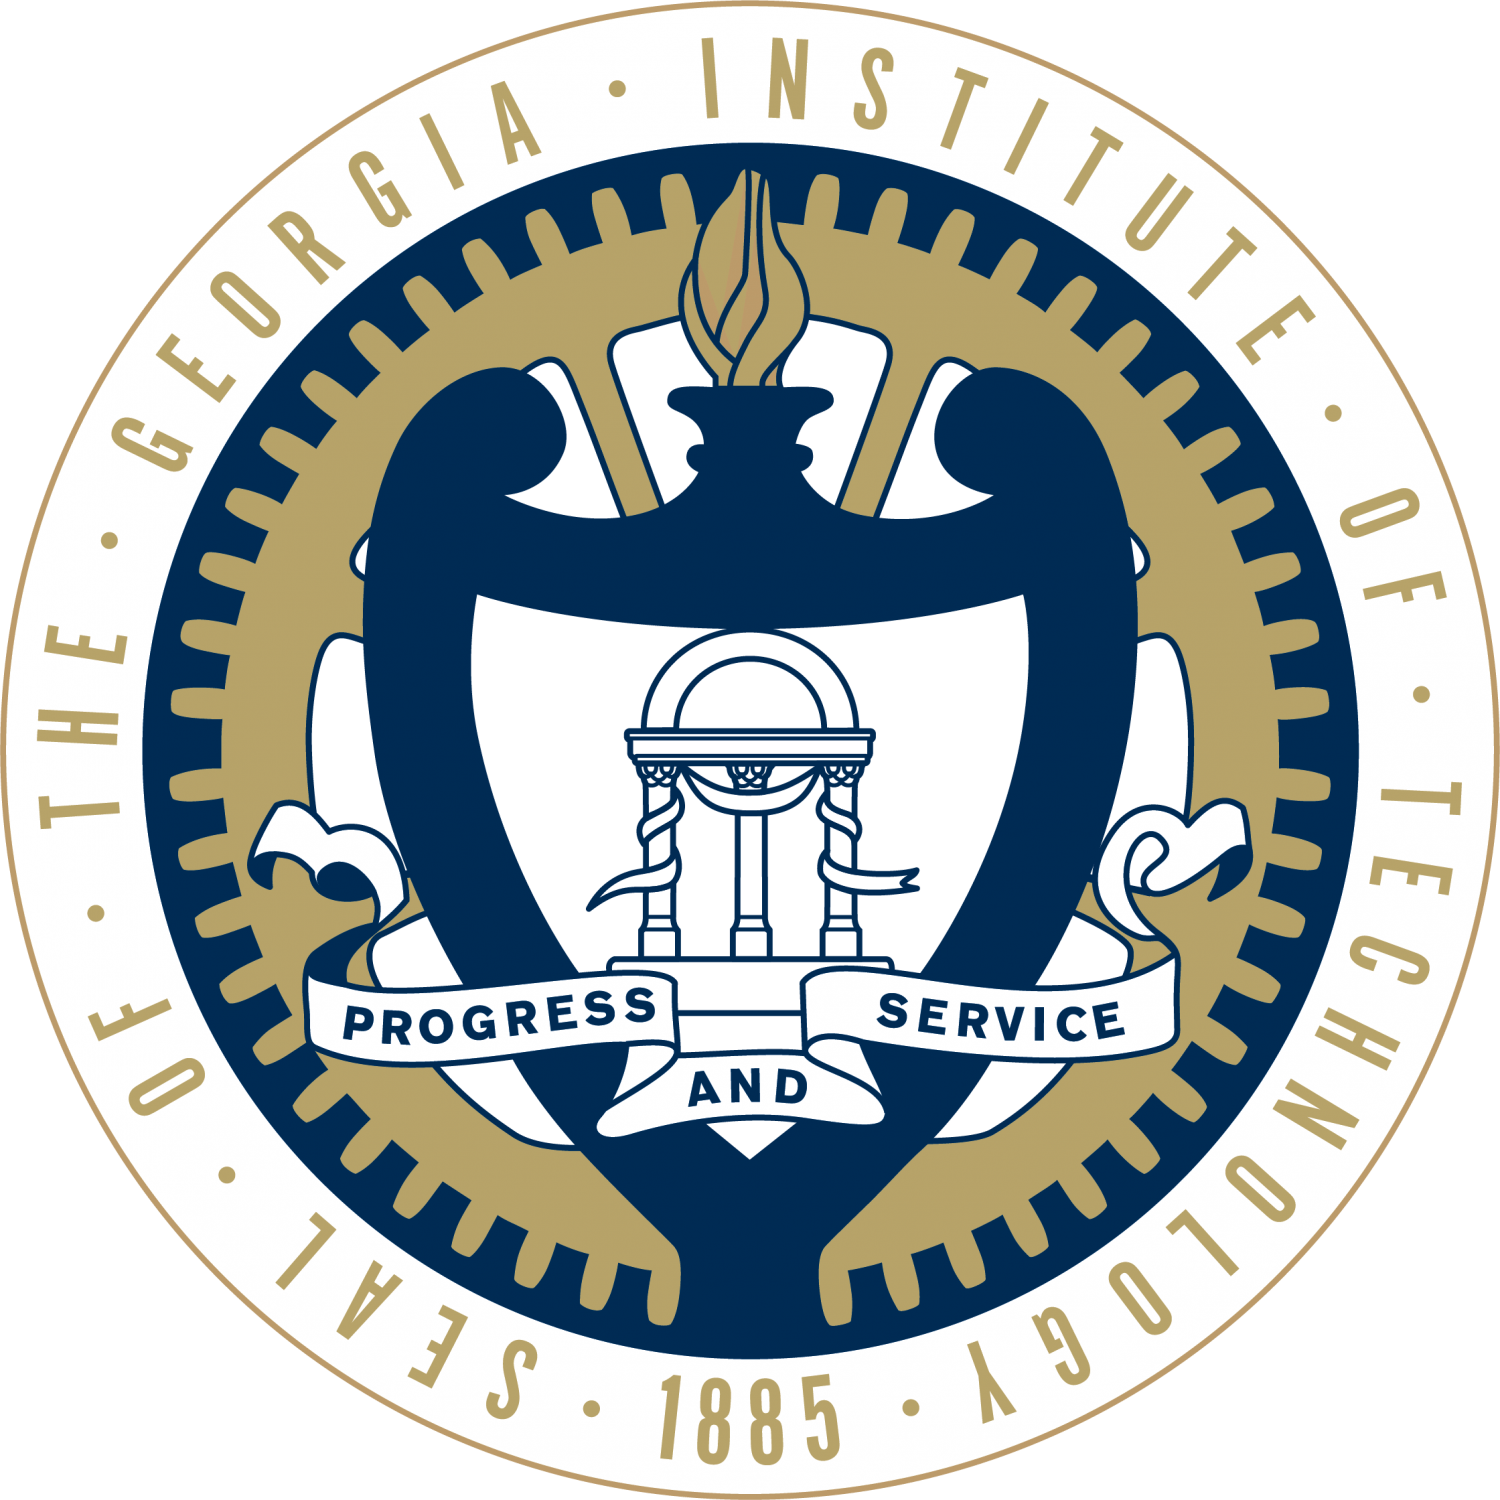 Official Logo - Logos and Wordmarks | Institute Communications | Georgia Tech